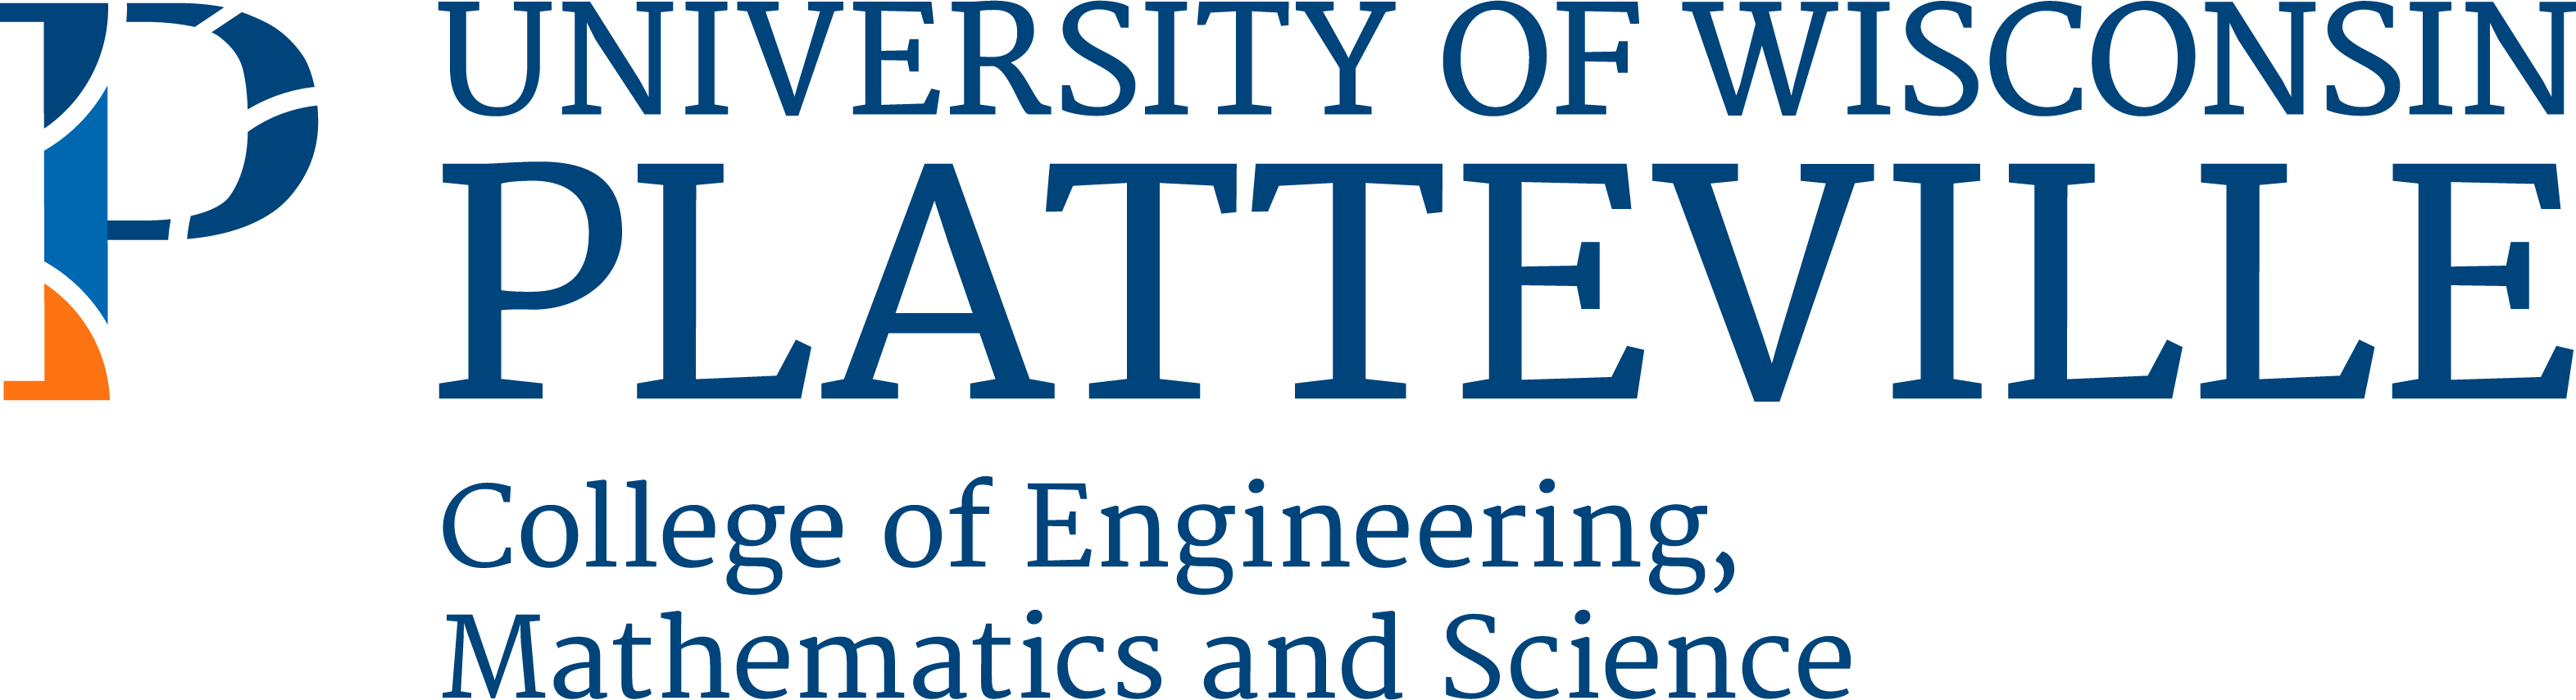 University of Wisconsin-Platteville College of Engineering, Mathematics and Science